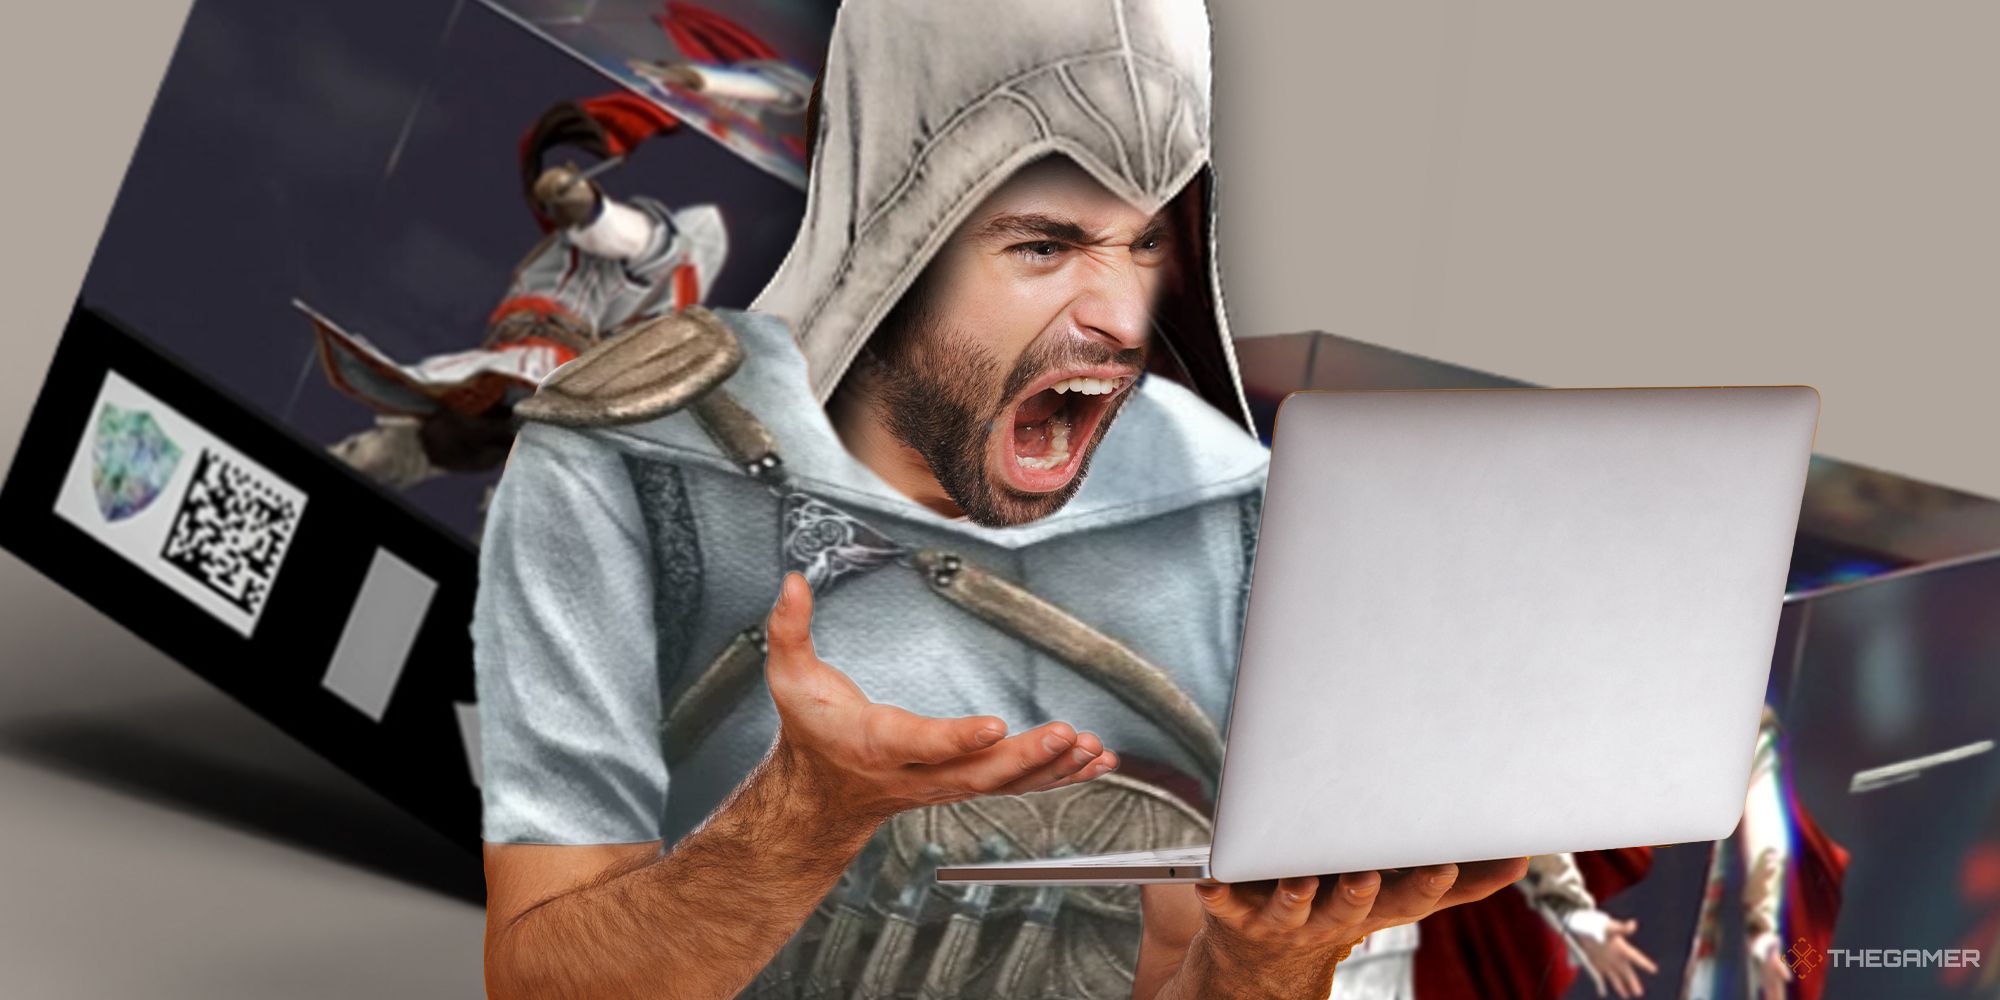 Man dressed up as an assassin from Assassin's Creed yells at a laptop